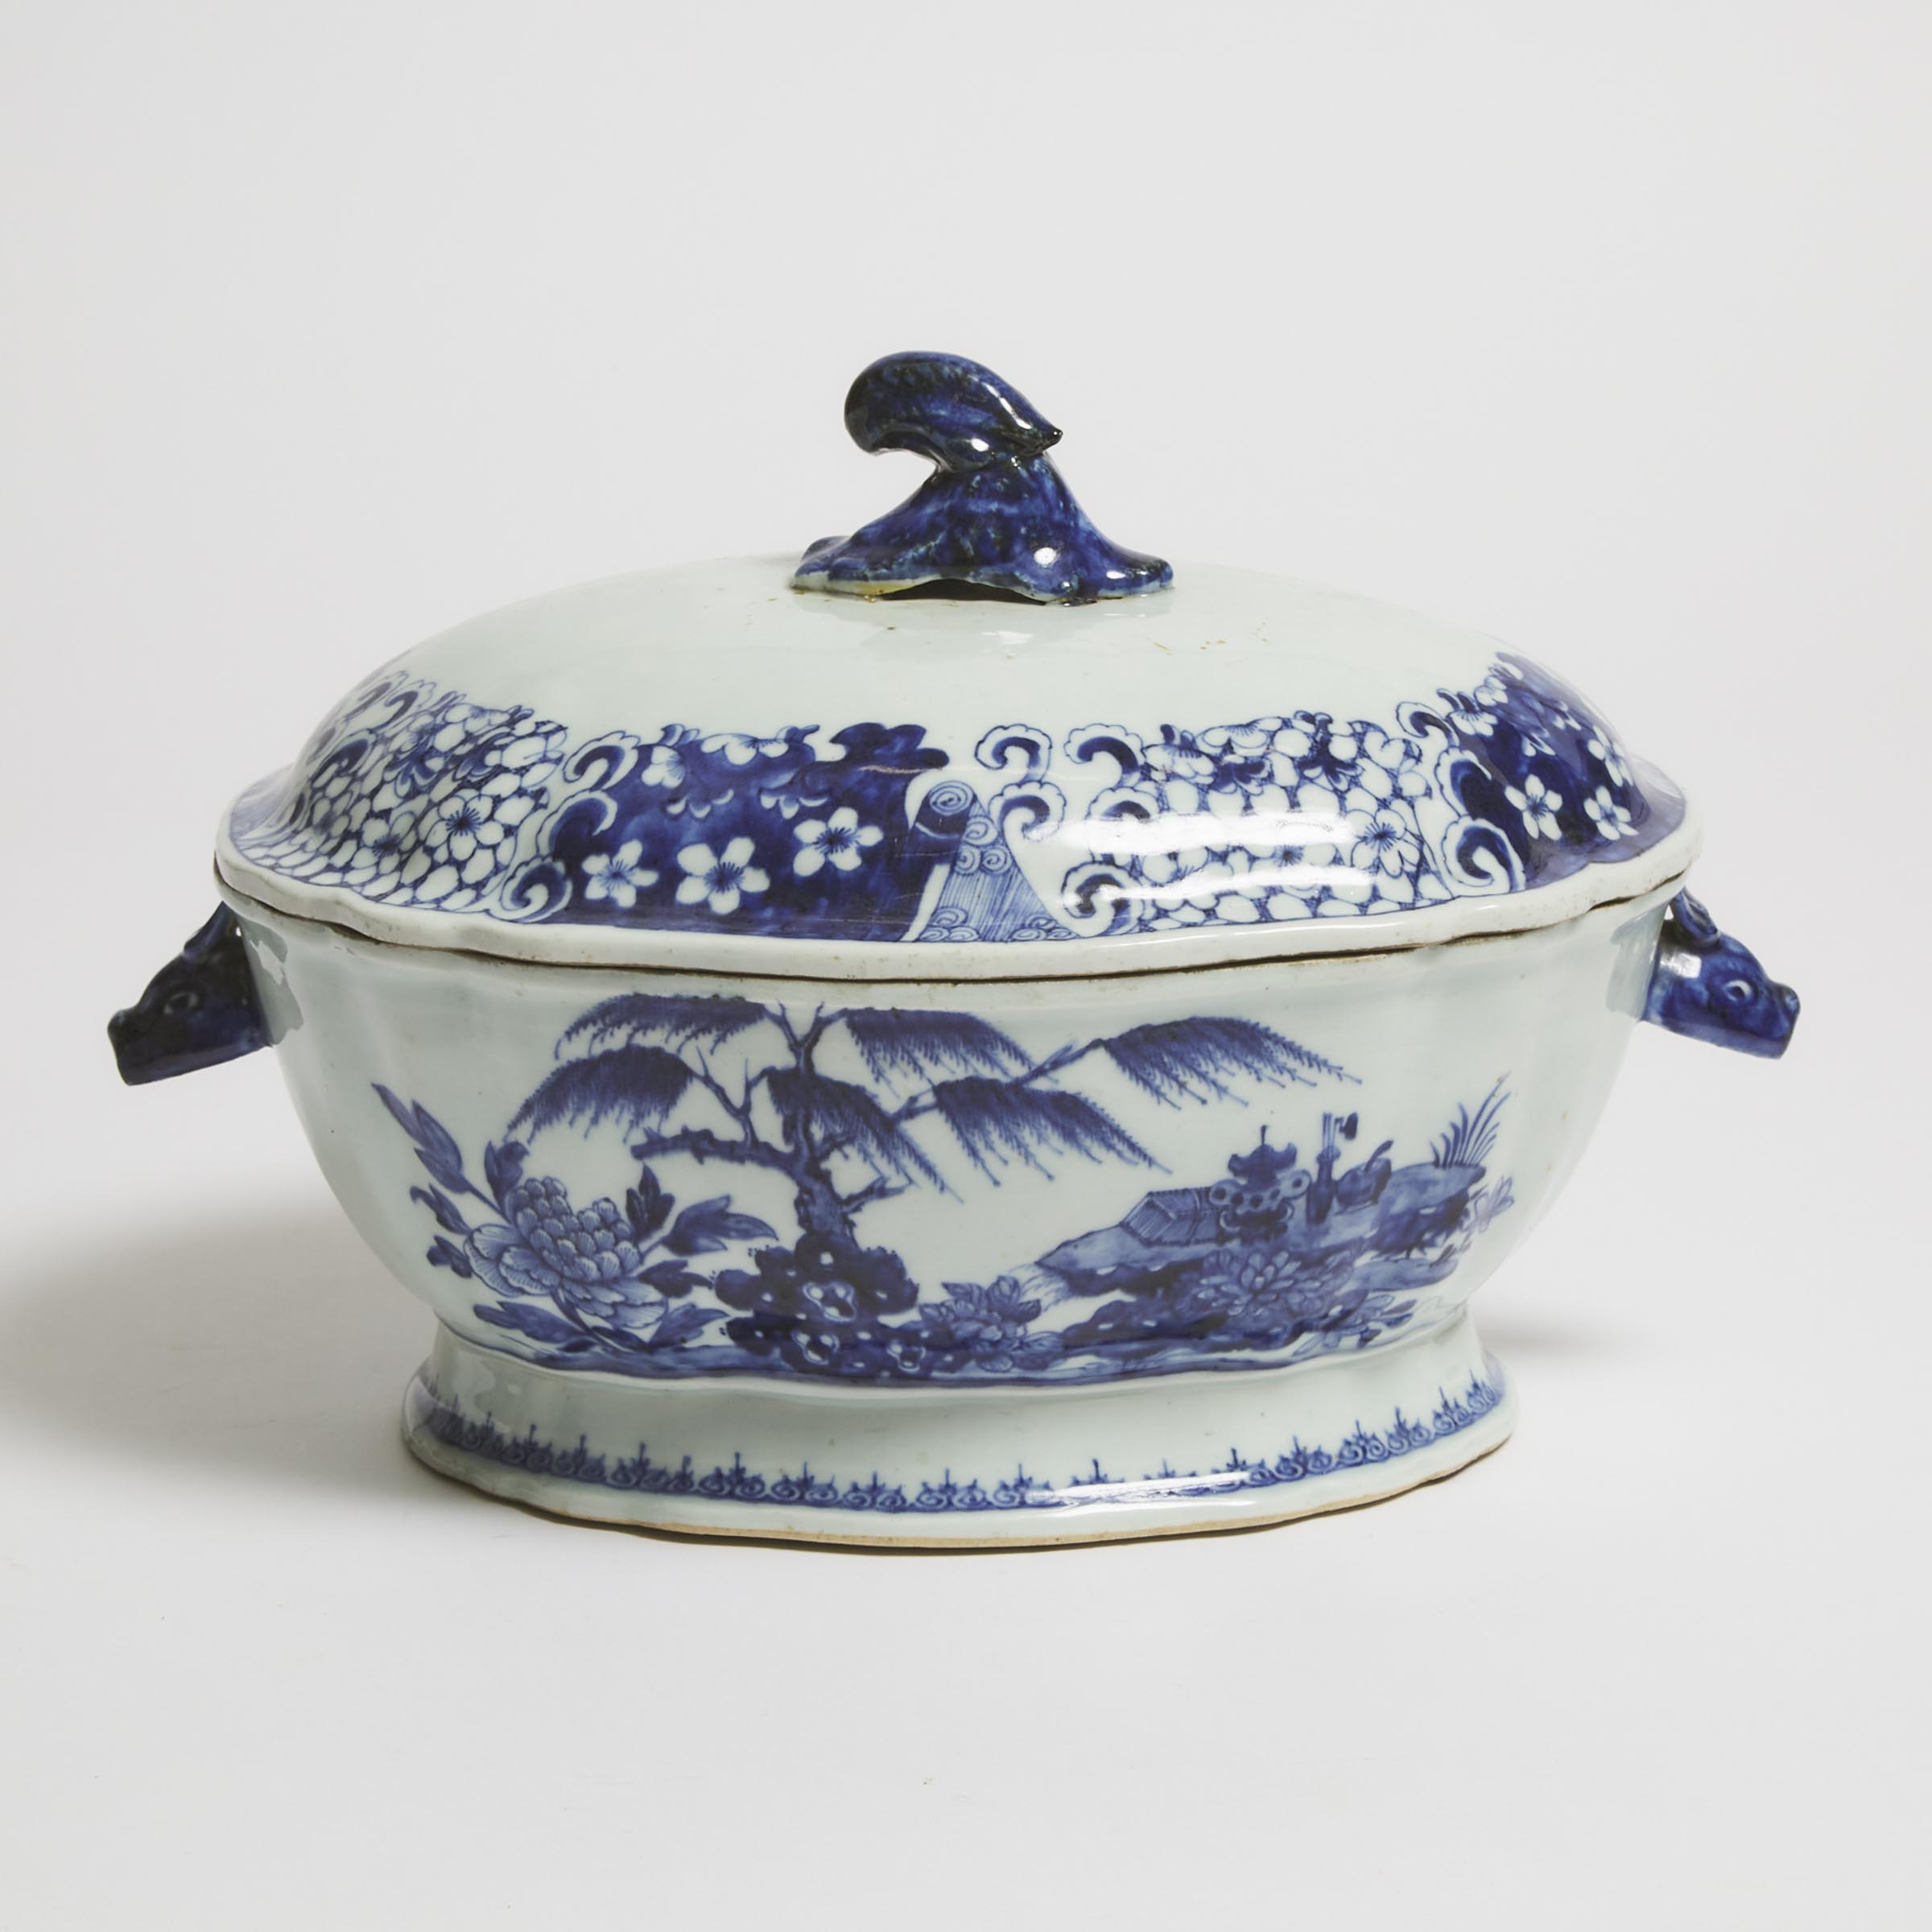 A Chinese Export Blue and White Tureen and Cover, Qianlong Period, 18th Century